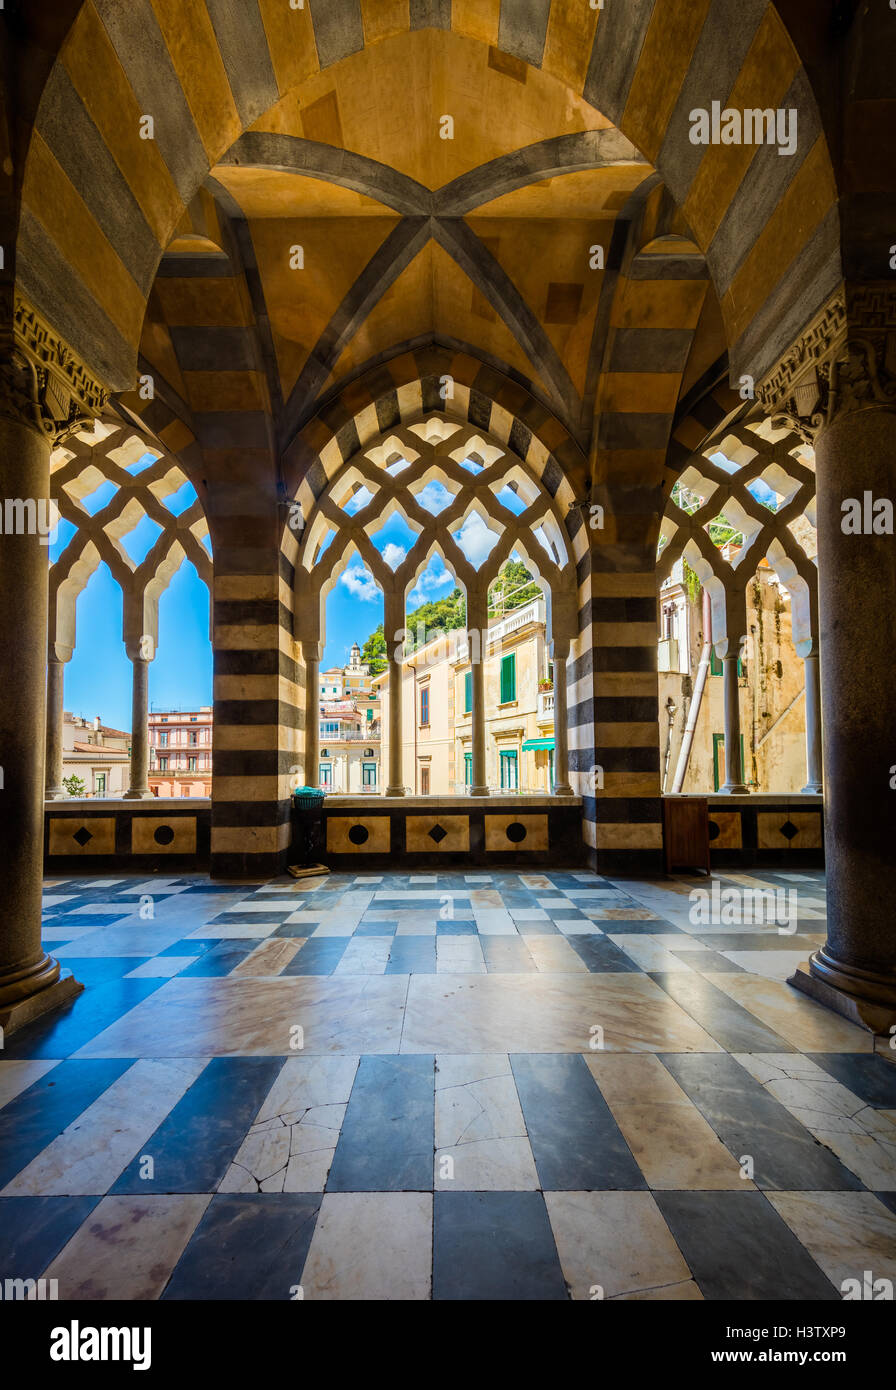 Amalfi Cathedral is a 9th-century Roman Catholic cathedral in the Piazza del Duomo, Amalfi, Italy. Stock Photo